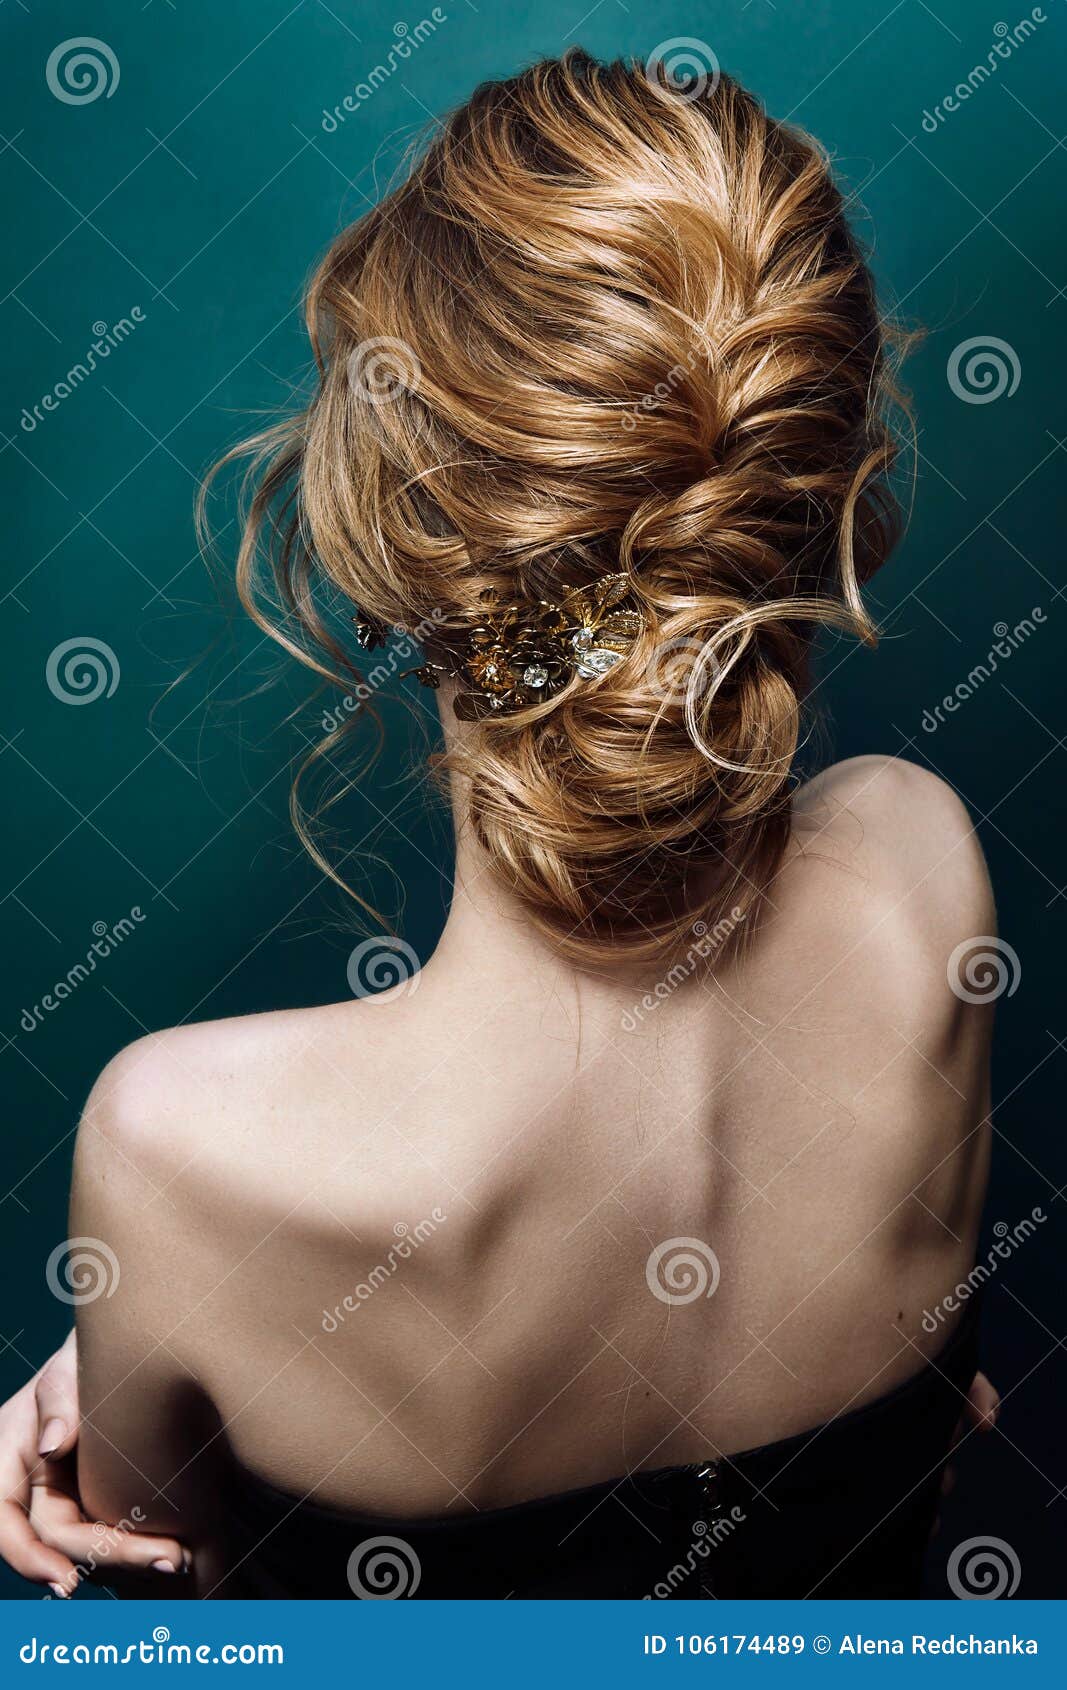 model blonde woman with perfect hairstyle and creative hair-dress, back view.